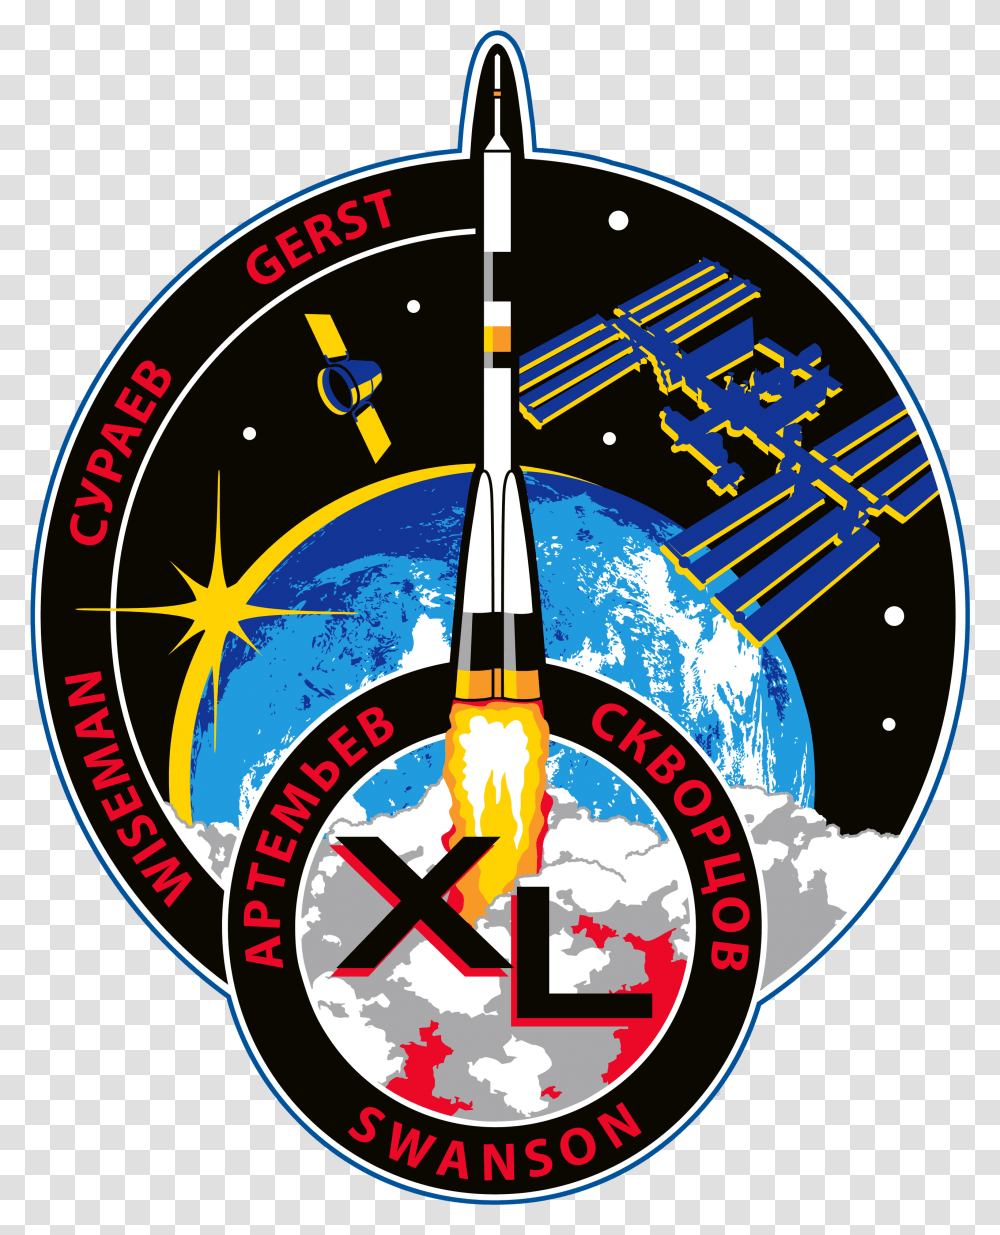 Fileiss Expedition 40 Patchpng Wikimedia Commons Patches Iss Mission, Compass, Transportation, Vehicle, Gauge Transparent Png